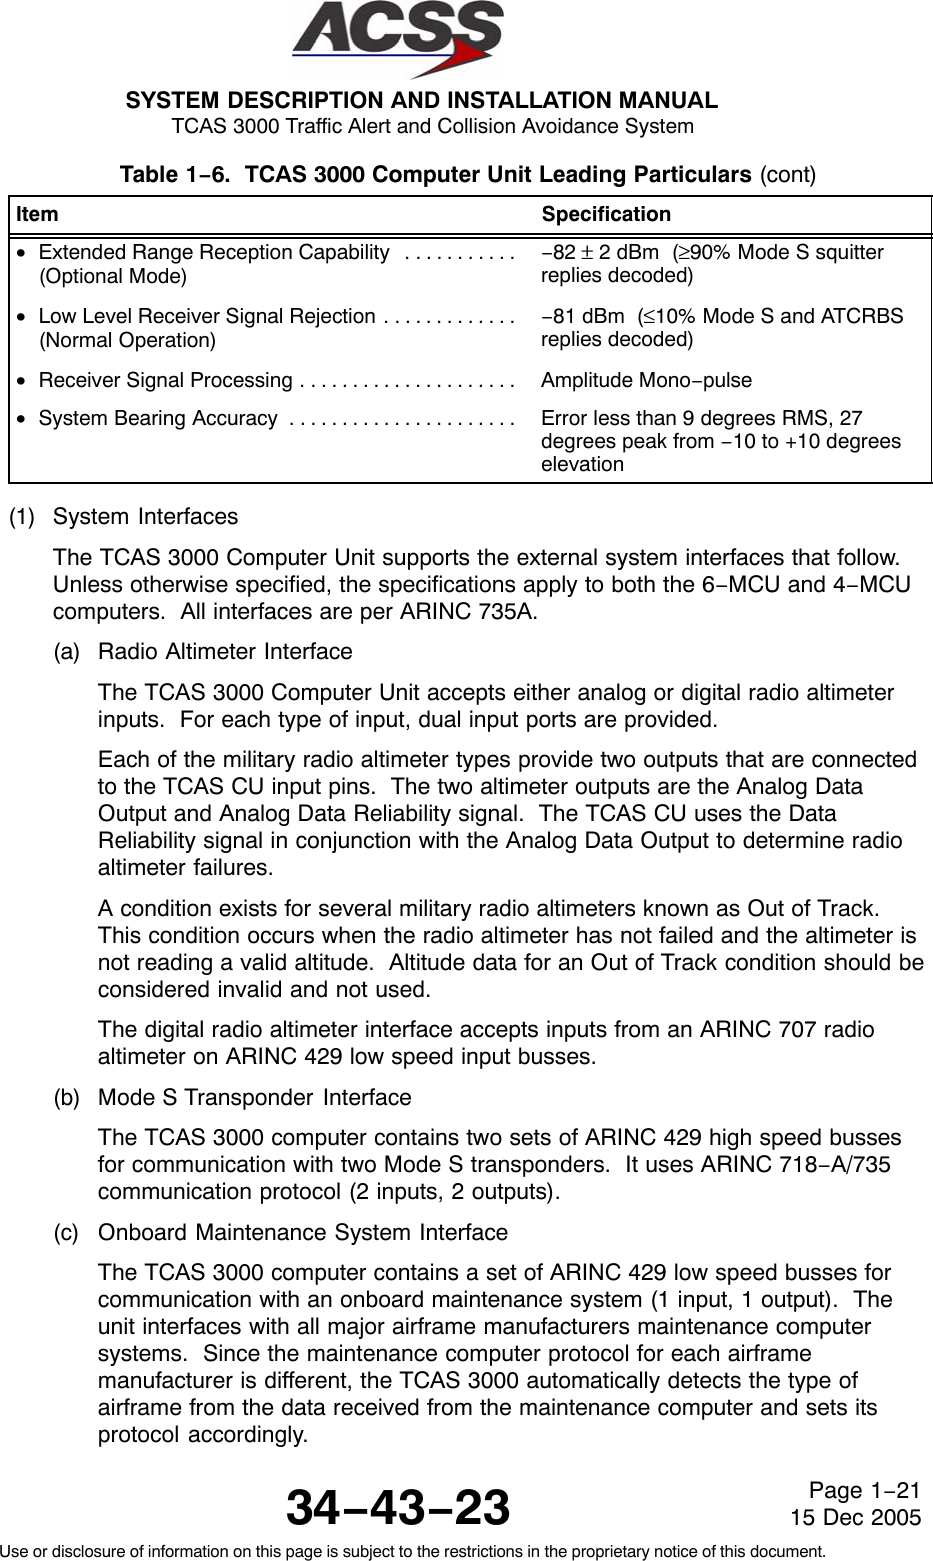 SYSTEM DESCRIPTION AND INSTALLATION MANUAL TCAS 3000 Traffic Alert and Collision Avoidance System34−43−23Use or disclosure of information on this page is subject to the restrictions in the proprietary notice of this document.Page 1−2115 Dec 2005Table 1−6.  TCAS 3000 Computer Unit Leading Particulars (cont)Item Specification•Extended Range Reception Capability . . . . . . . . . . . (Optional Mode)−82 ± 2 dBm  (≥90% Mode S squitterreplies decoded)•Low Level Receiver Signal Rejection . . . . . . . . . . . . . (Normal Operation)−81 dBm  (≤10% Mode S and ATCRBSreplies decoded)•Receiver Signal Processing . . . . . . . . . . . . . . . . . . . . .  Amplitude Mono−pulse•System Bearing Accuracy . . . . . . . . . . . . . . . . . . . . . .  Error less than 9 degrees RMS, 27degrees peak from −10 to +10 degreeselevation(1) System InterfacesThe TCAS 3000 Computer Unit supports the external system interfaces that follow.Unless otherwise specified, the specifications apply to both the 6−MCU and 4−MCUcomputers.  All interfaces are per ARINC 735A.(a) Radio Altimeter InterfaceThe TCAS 3000 Computer Unit accepts either analog or digital radio altimeterinputs.  For each type of input, dual input ports are provided.Each of the military radio altimeter types provide two outputs that are connectedto the TCAS CU input pins.  The two altimeter outputs are the Analog DataOutput and Analog Data Reliability signal.  The TCAS CU uses the DataReliability signal in conjunction with the Analog Data Output to determine radioaltimeter failures.A condition exists for several military radio altimeters known as Out of Track.This condition occurs when the radio altimeter has not failed and the altimeter isnot reading a valid altitude.  Altitude data for an Out of Track condition should beconsidered invalid and not used.The digital radio altimeter interface accepts inputs from an ARINC 707 radioaltimeter on ARINC 429 low speed input busses.(b) Mode S Transponder  InterfaceThe TCAS 3000 computer contains two sets of ARINC 429 high speed bussesfor communication with two Mode S transponders.  It uses ARINC 718−A/735communication protocol (2 inputs, 2 outputs).(c) Onboard Maintenance System InterfaceThe TCAS 3000 computer contains a set of ARINC 429 low speed busses forcommunication with an onboard maintenance system (1 input, 1 output).  Theunit interfaces with all major airframe manufacturers maintenance computersystems.  Since the maintenance computer protocol for each airframemanufacturer is different, the TCAS 3000 automatically detects the type ofairframe from the data received from the maintenance computer and sets itsprotocol accordingly.